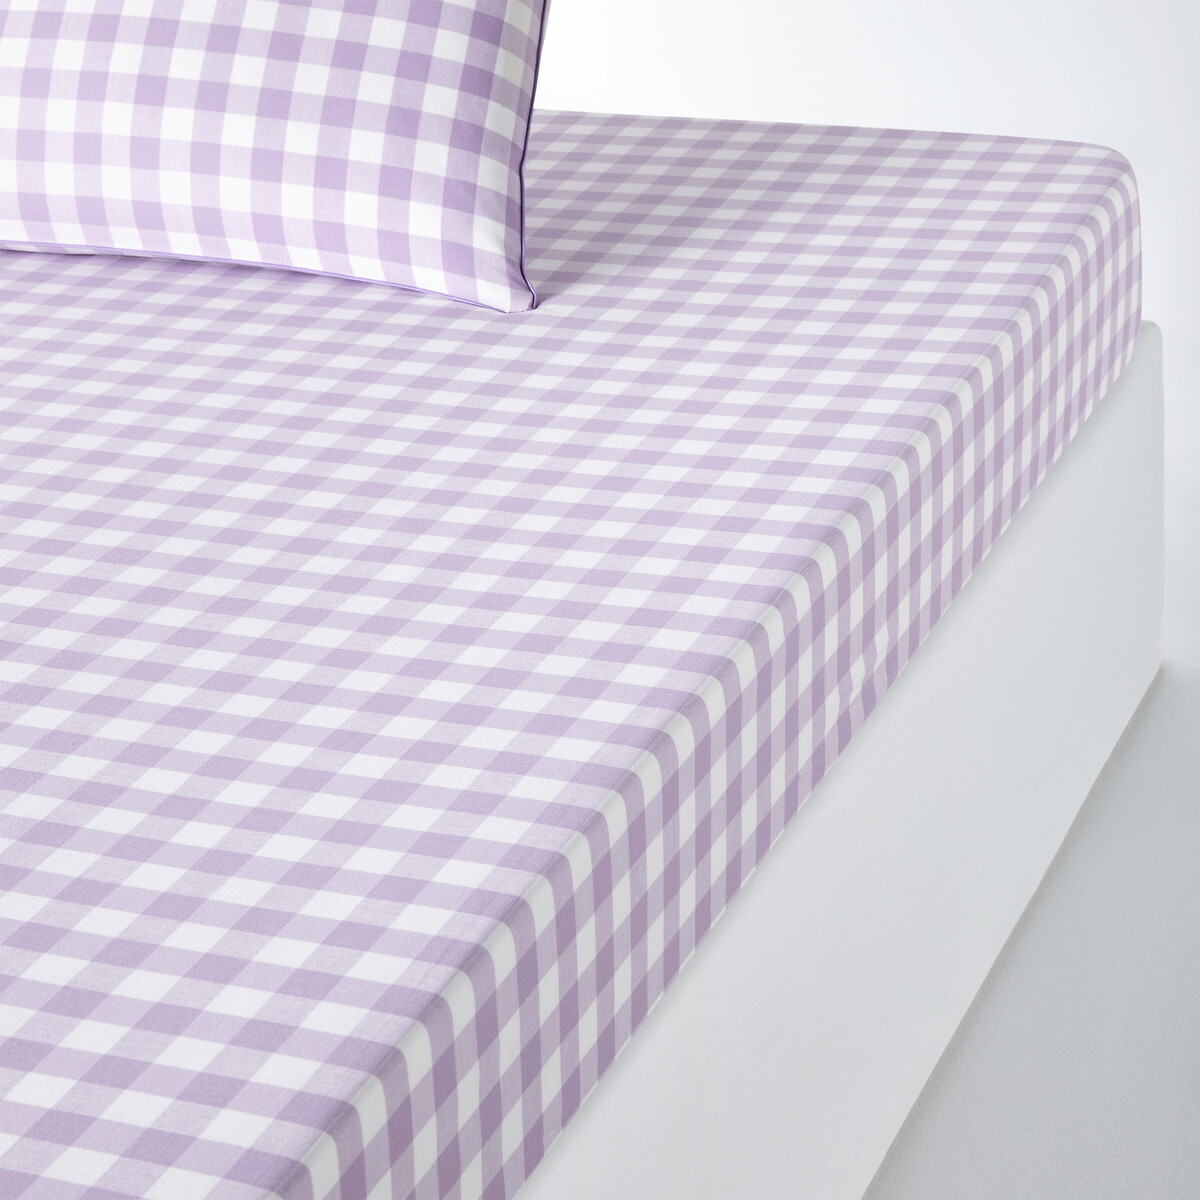 Veldi Purple Gingham Check 100% Cotton Fitted Sheet